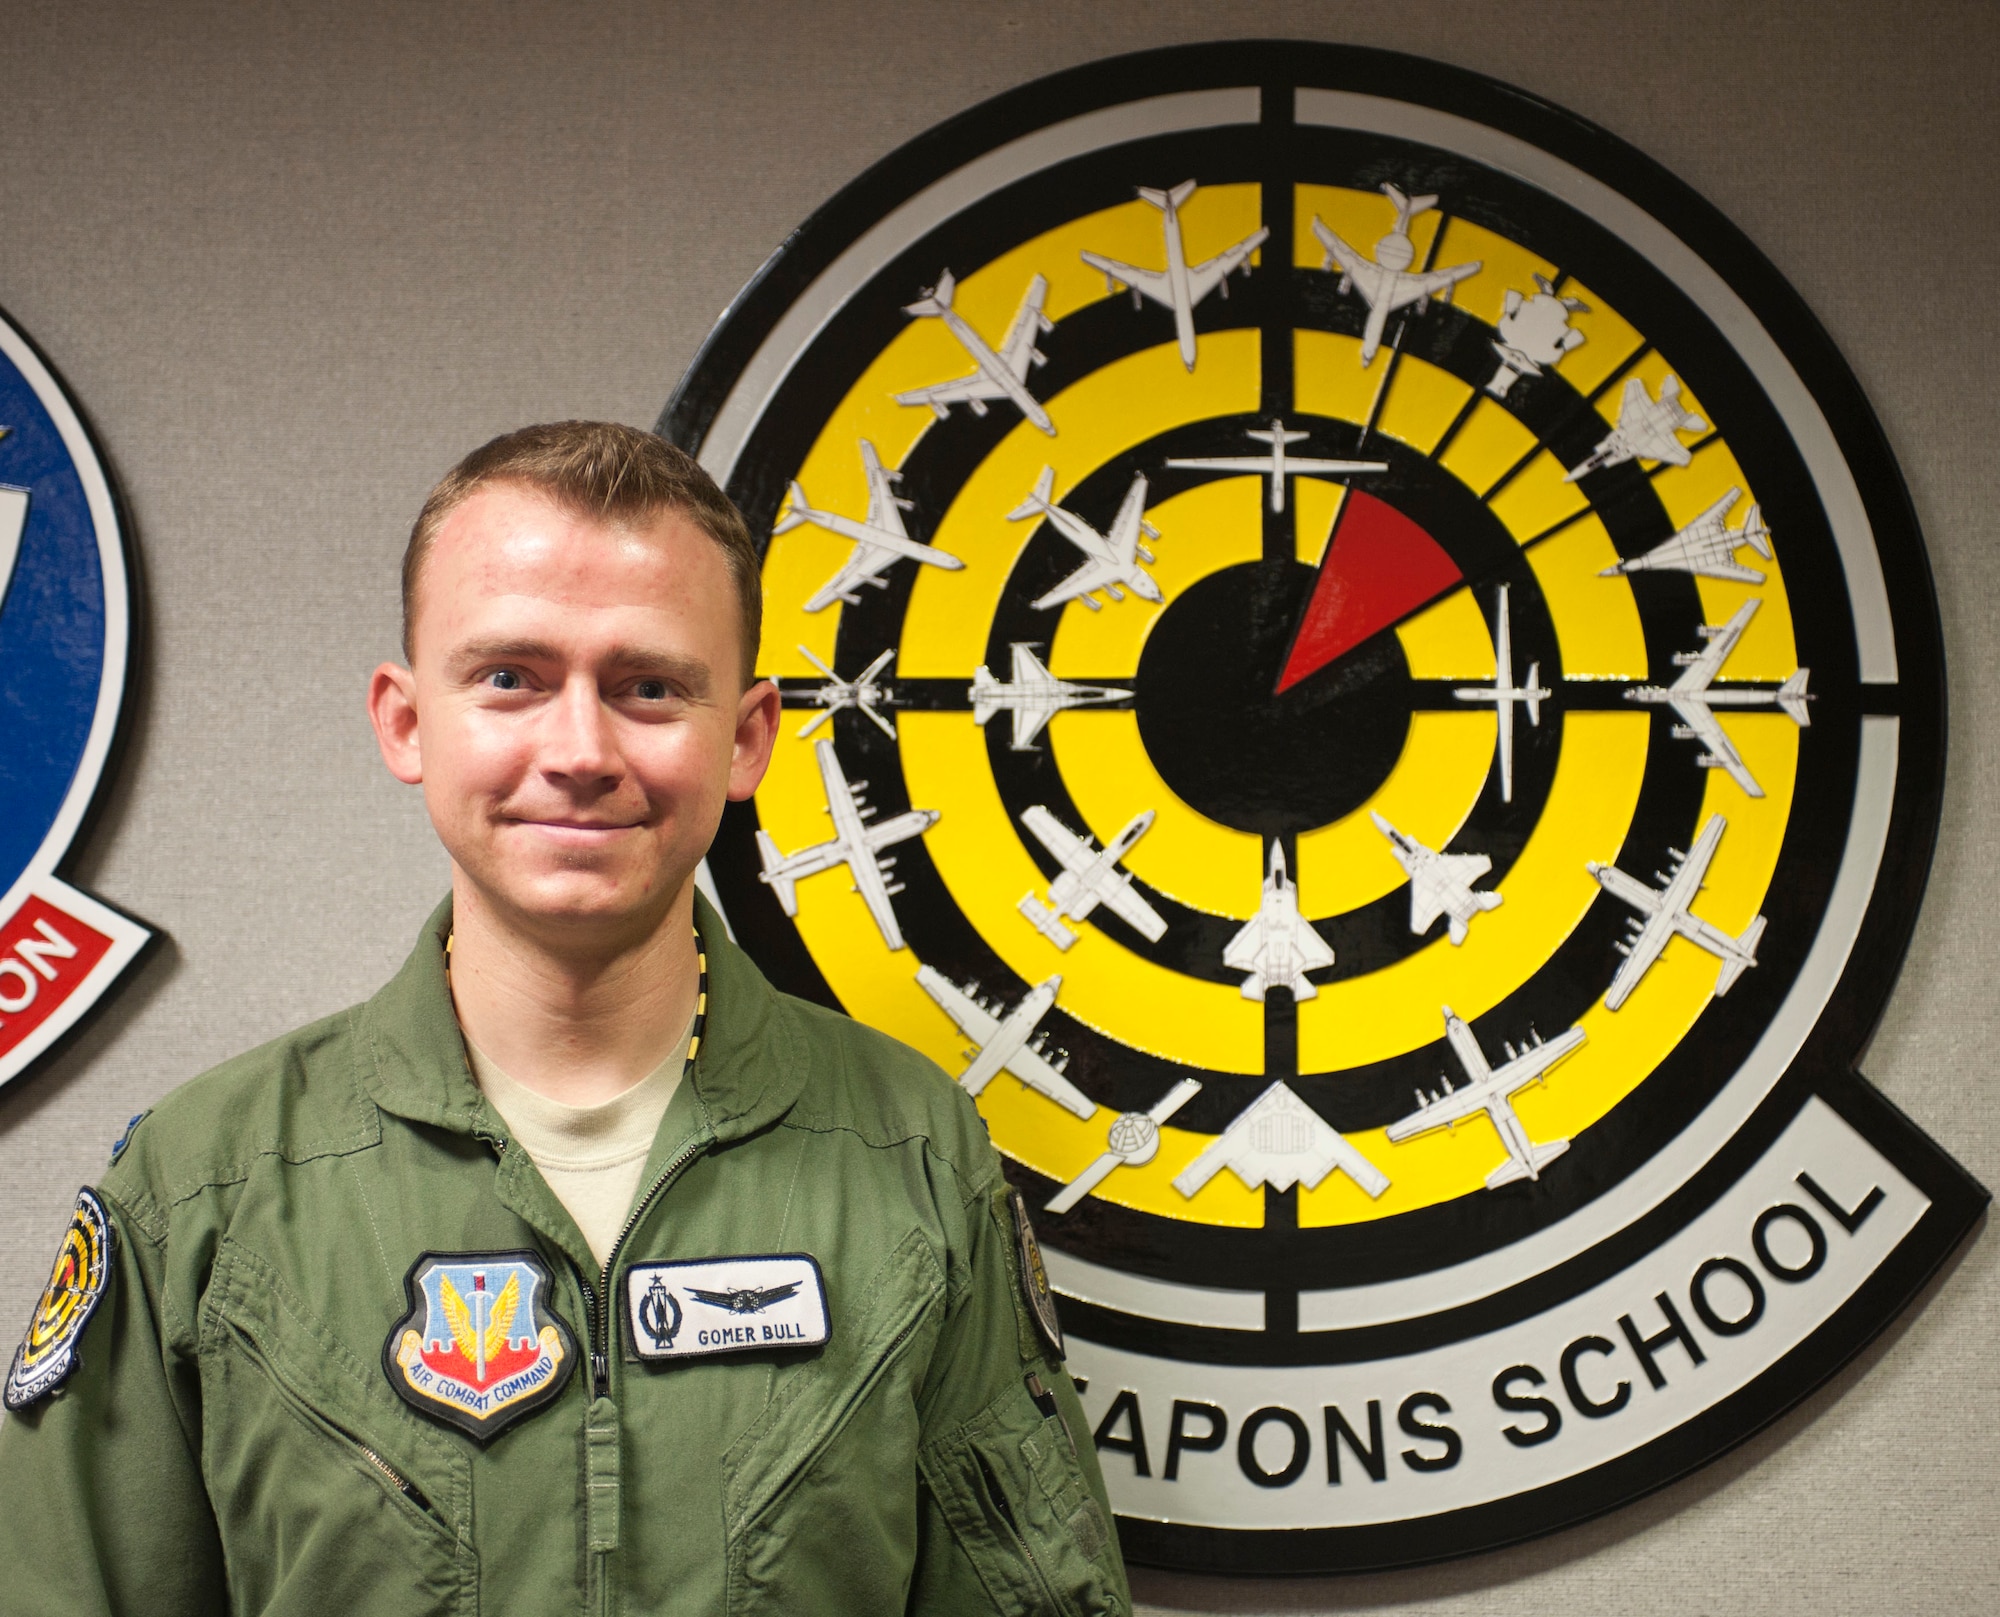 “Our mothers do important stuff for us on an everyday basis and it’s easy to take that for granted. It’s good to have a day to stop and focus on our mothers.” – Capt. David Bull, Weapons School executive officer